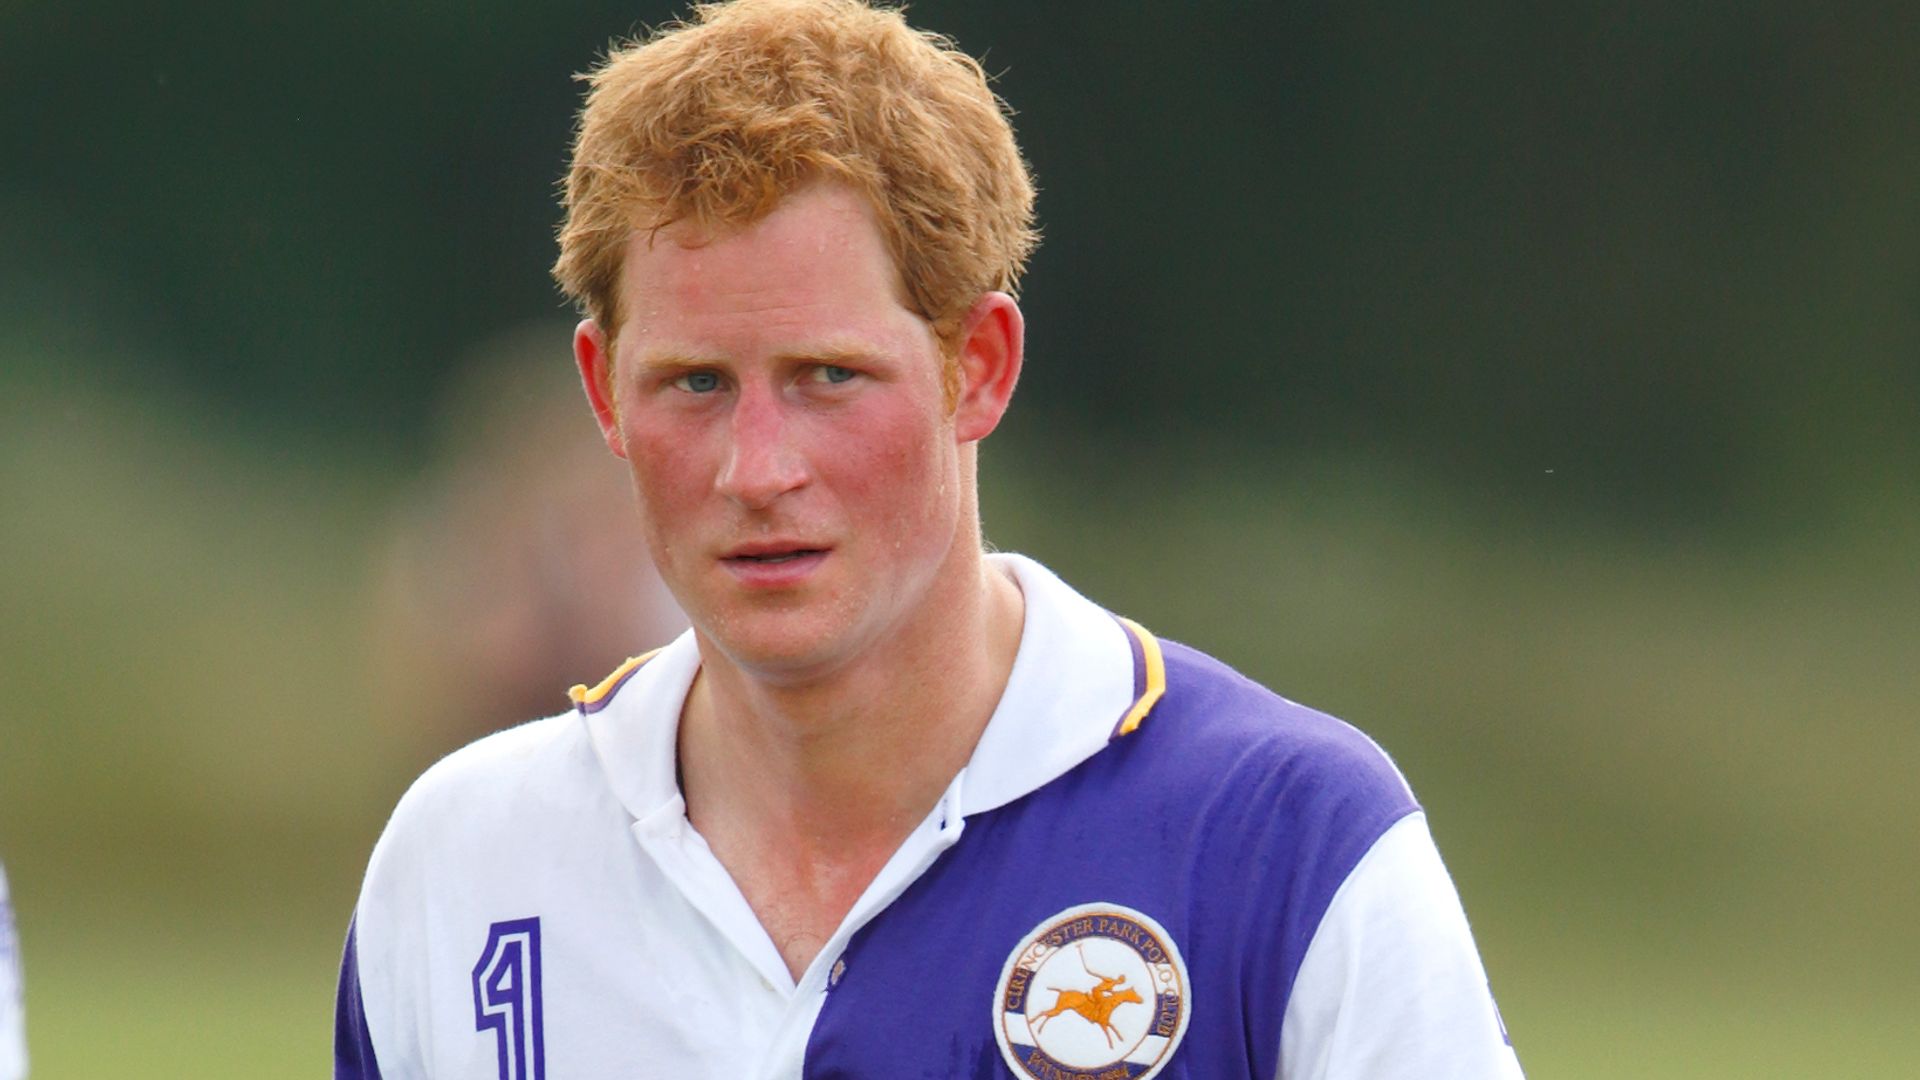 Prince Harry attends the prize giving after playing in the Jerudong Trophy polo match at Cirencester Park Polo Club on July 14, 2013 